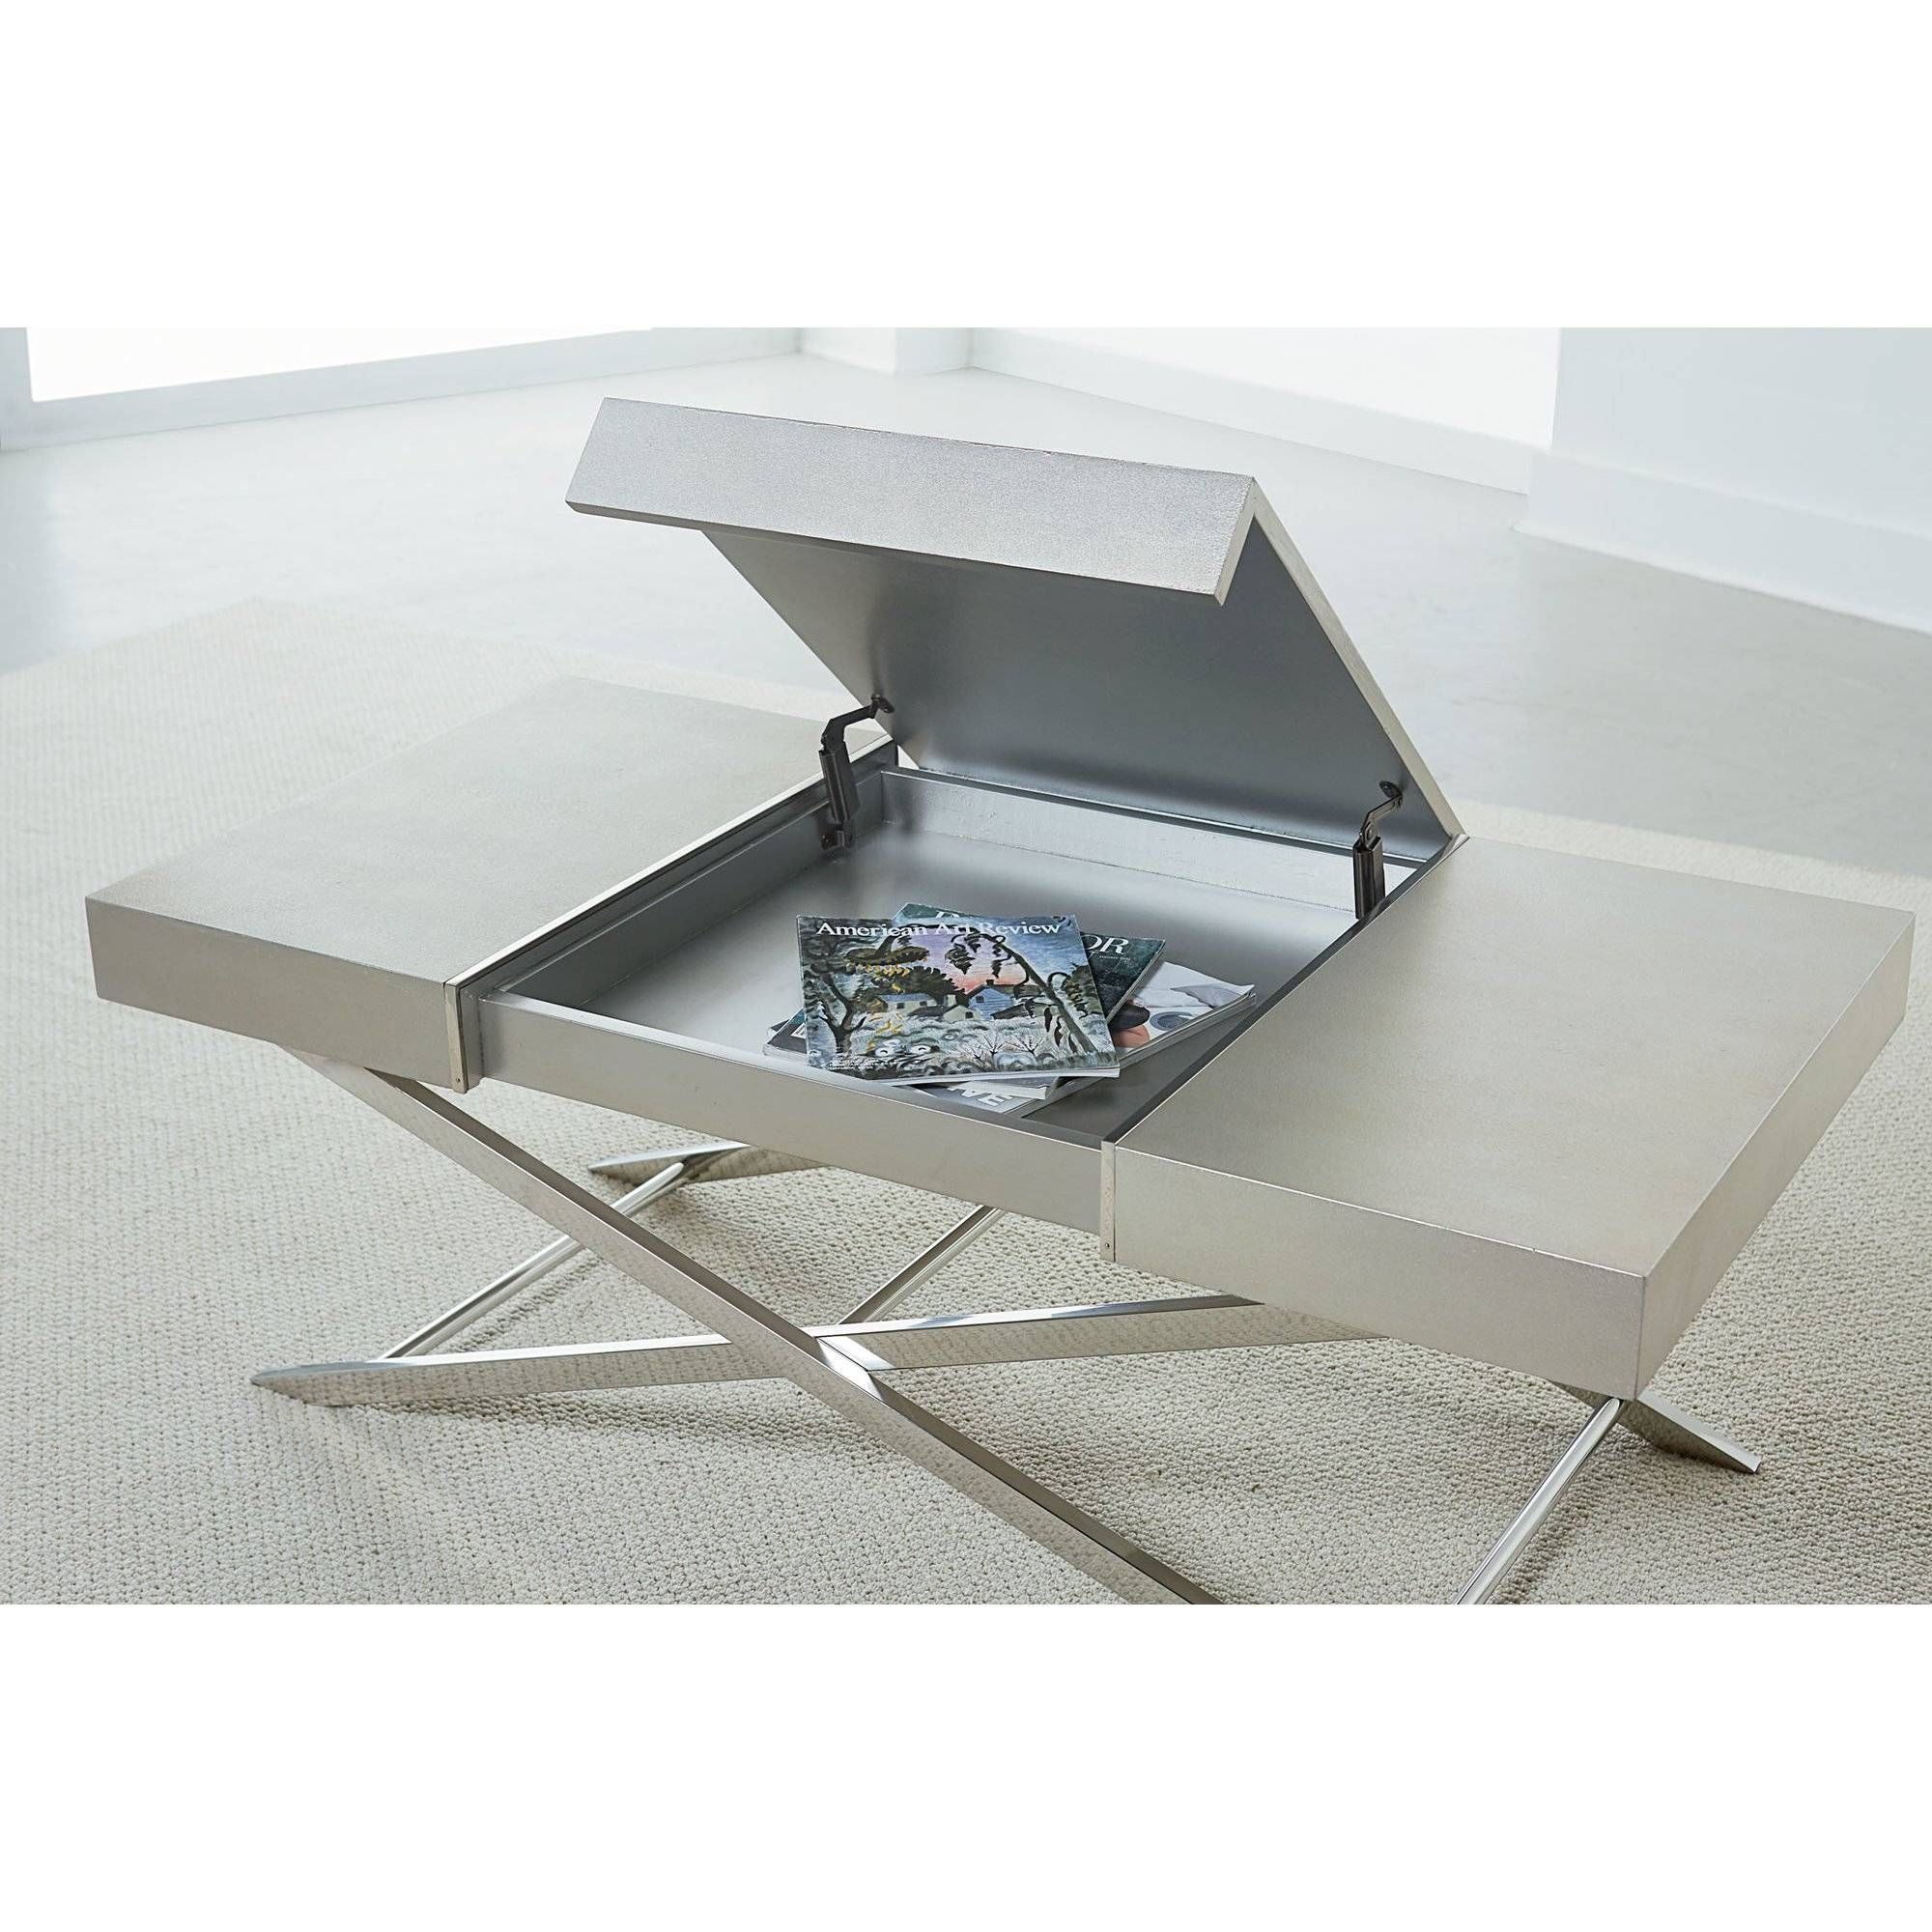 Standard Furniture Ava Coffee Table With Lift Top | Wayfair Supply For Ava Coffee Tables (View 12 of 30)